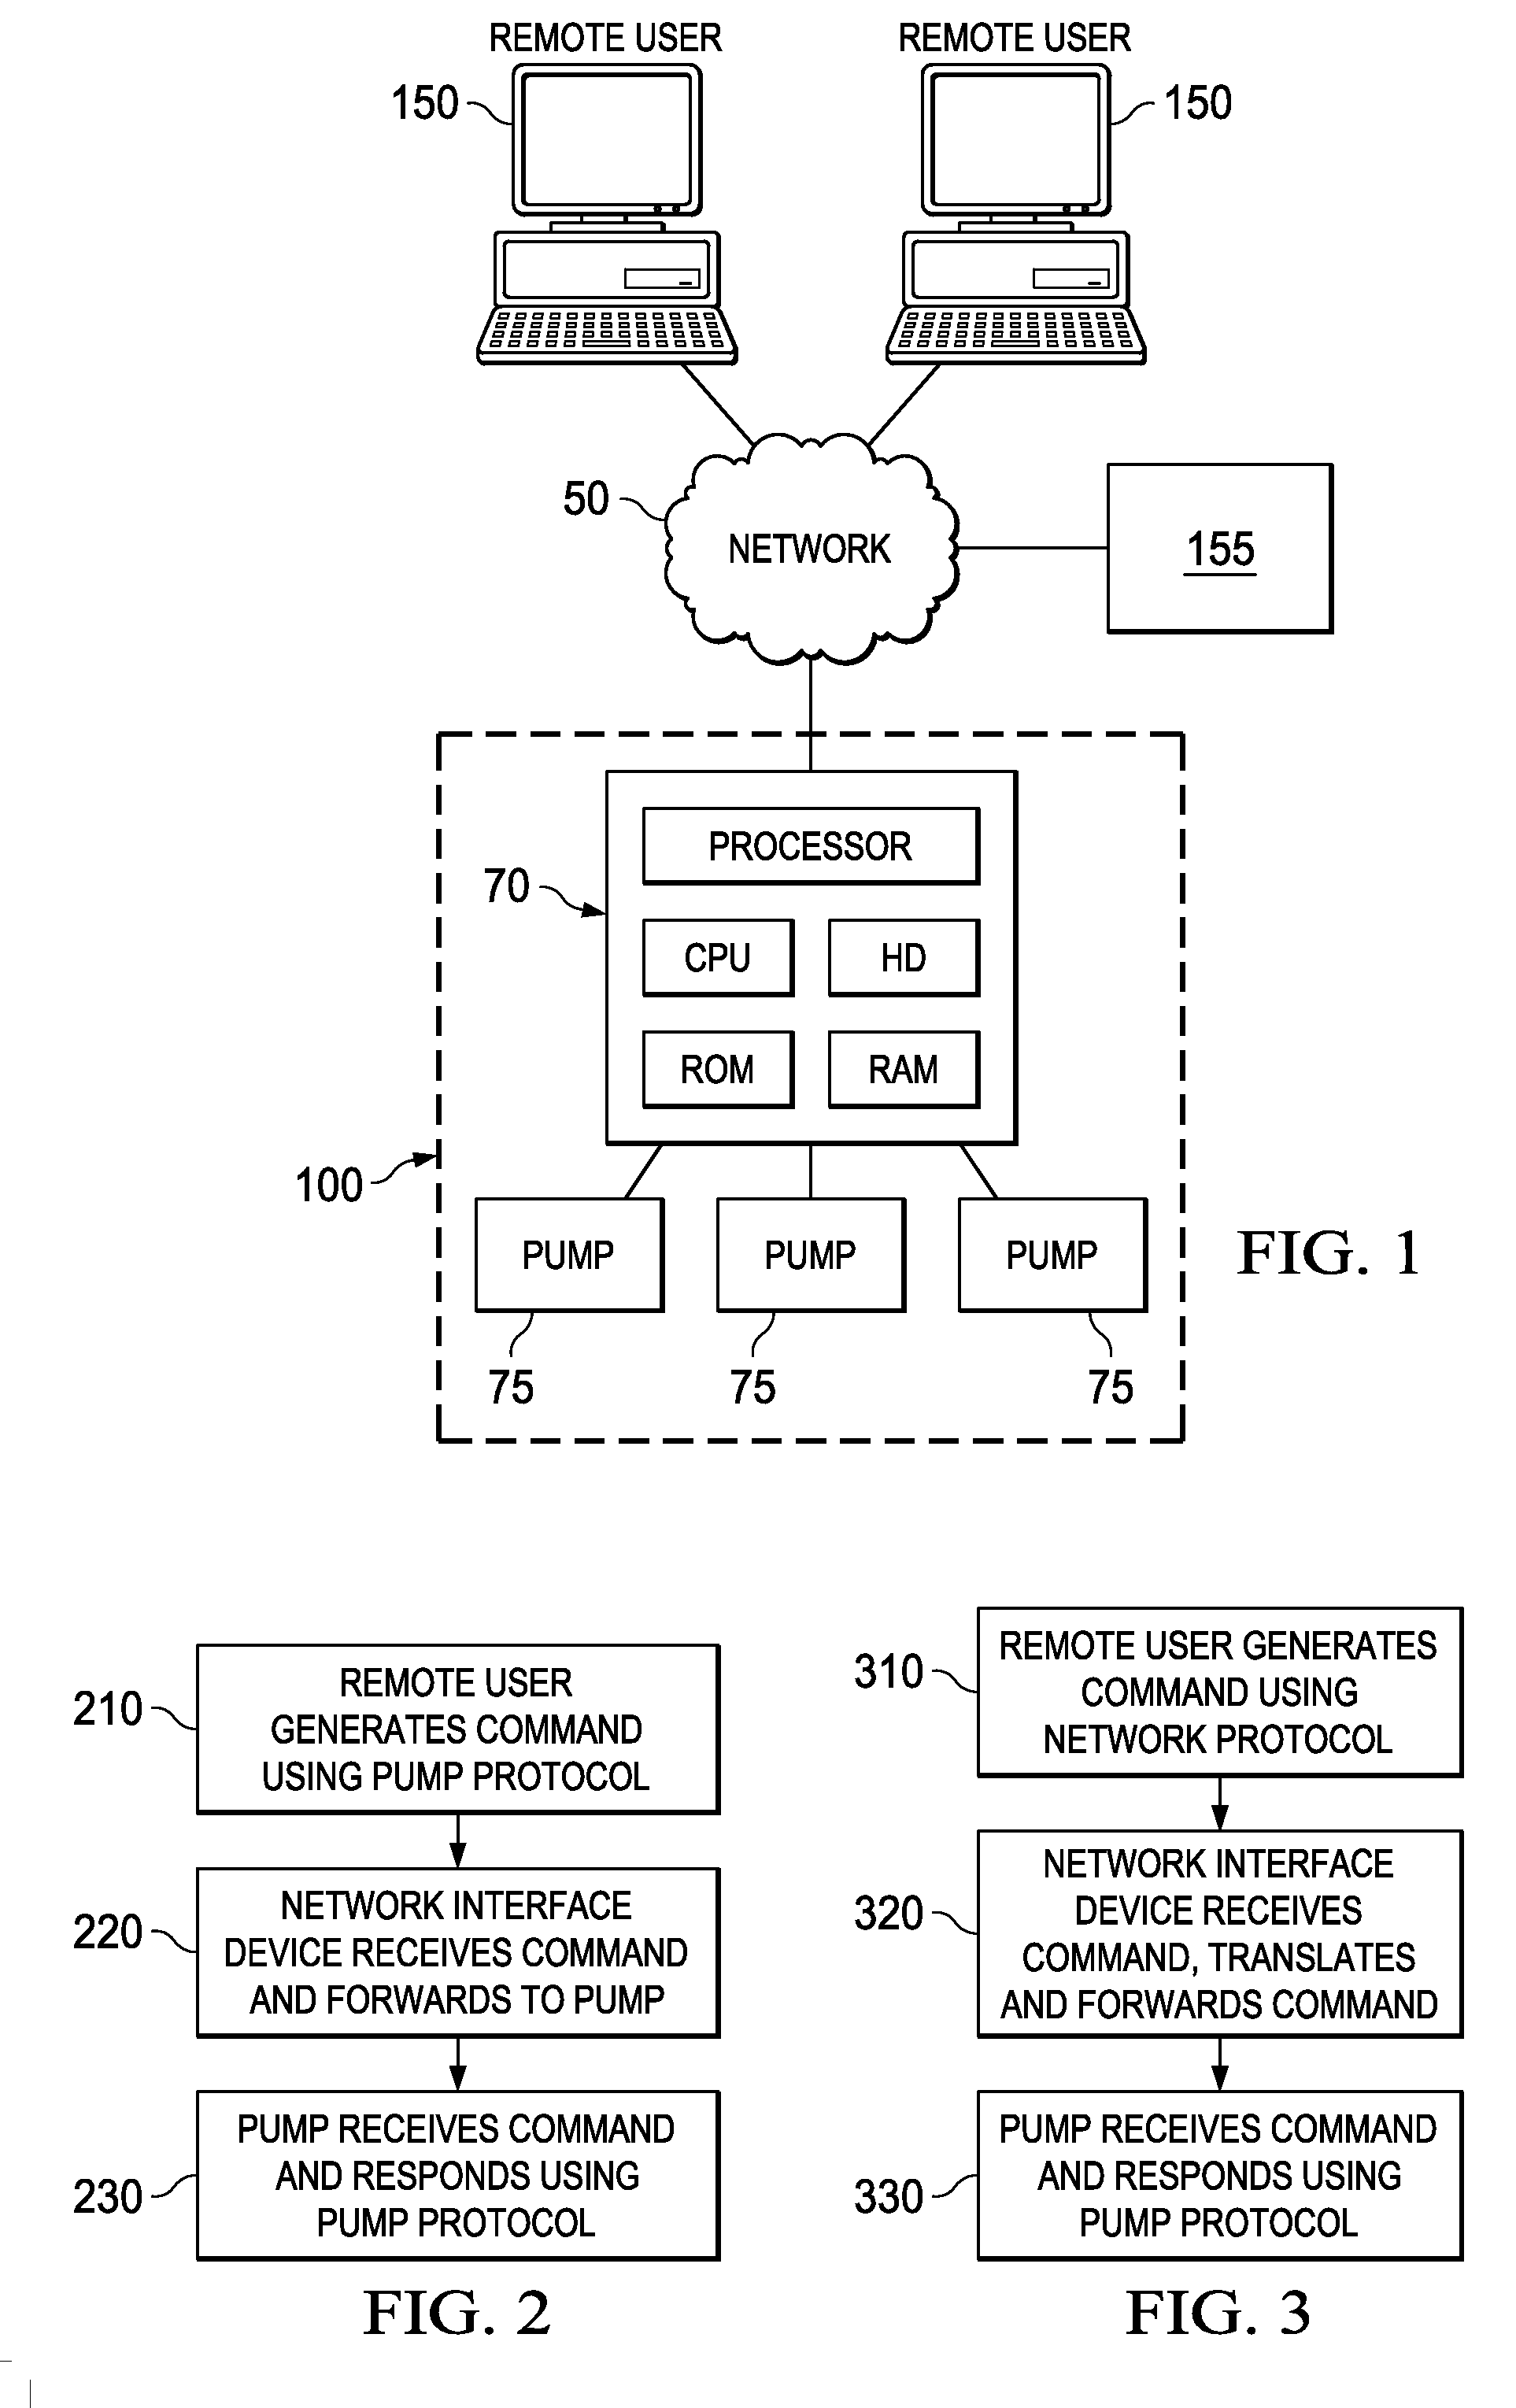 Network Interface Device